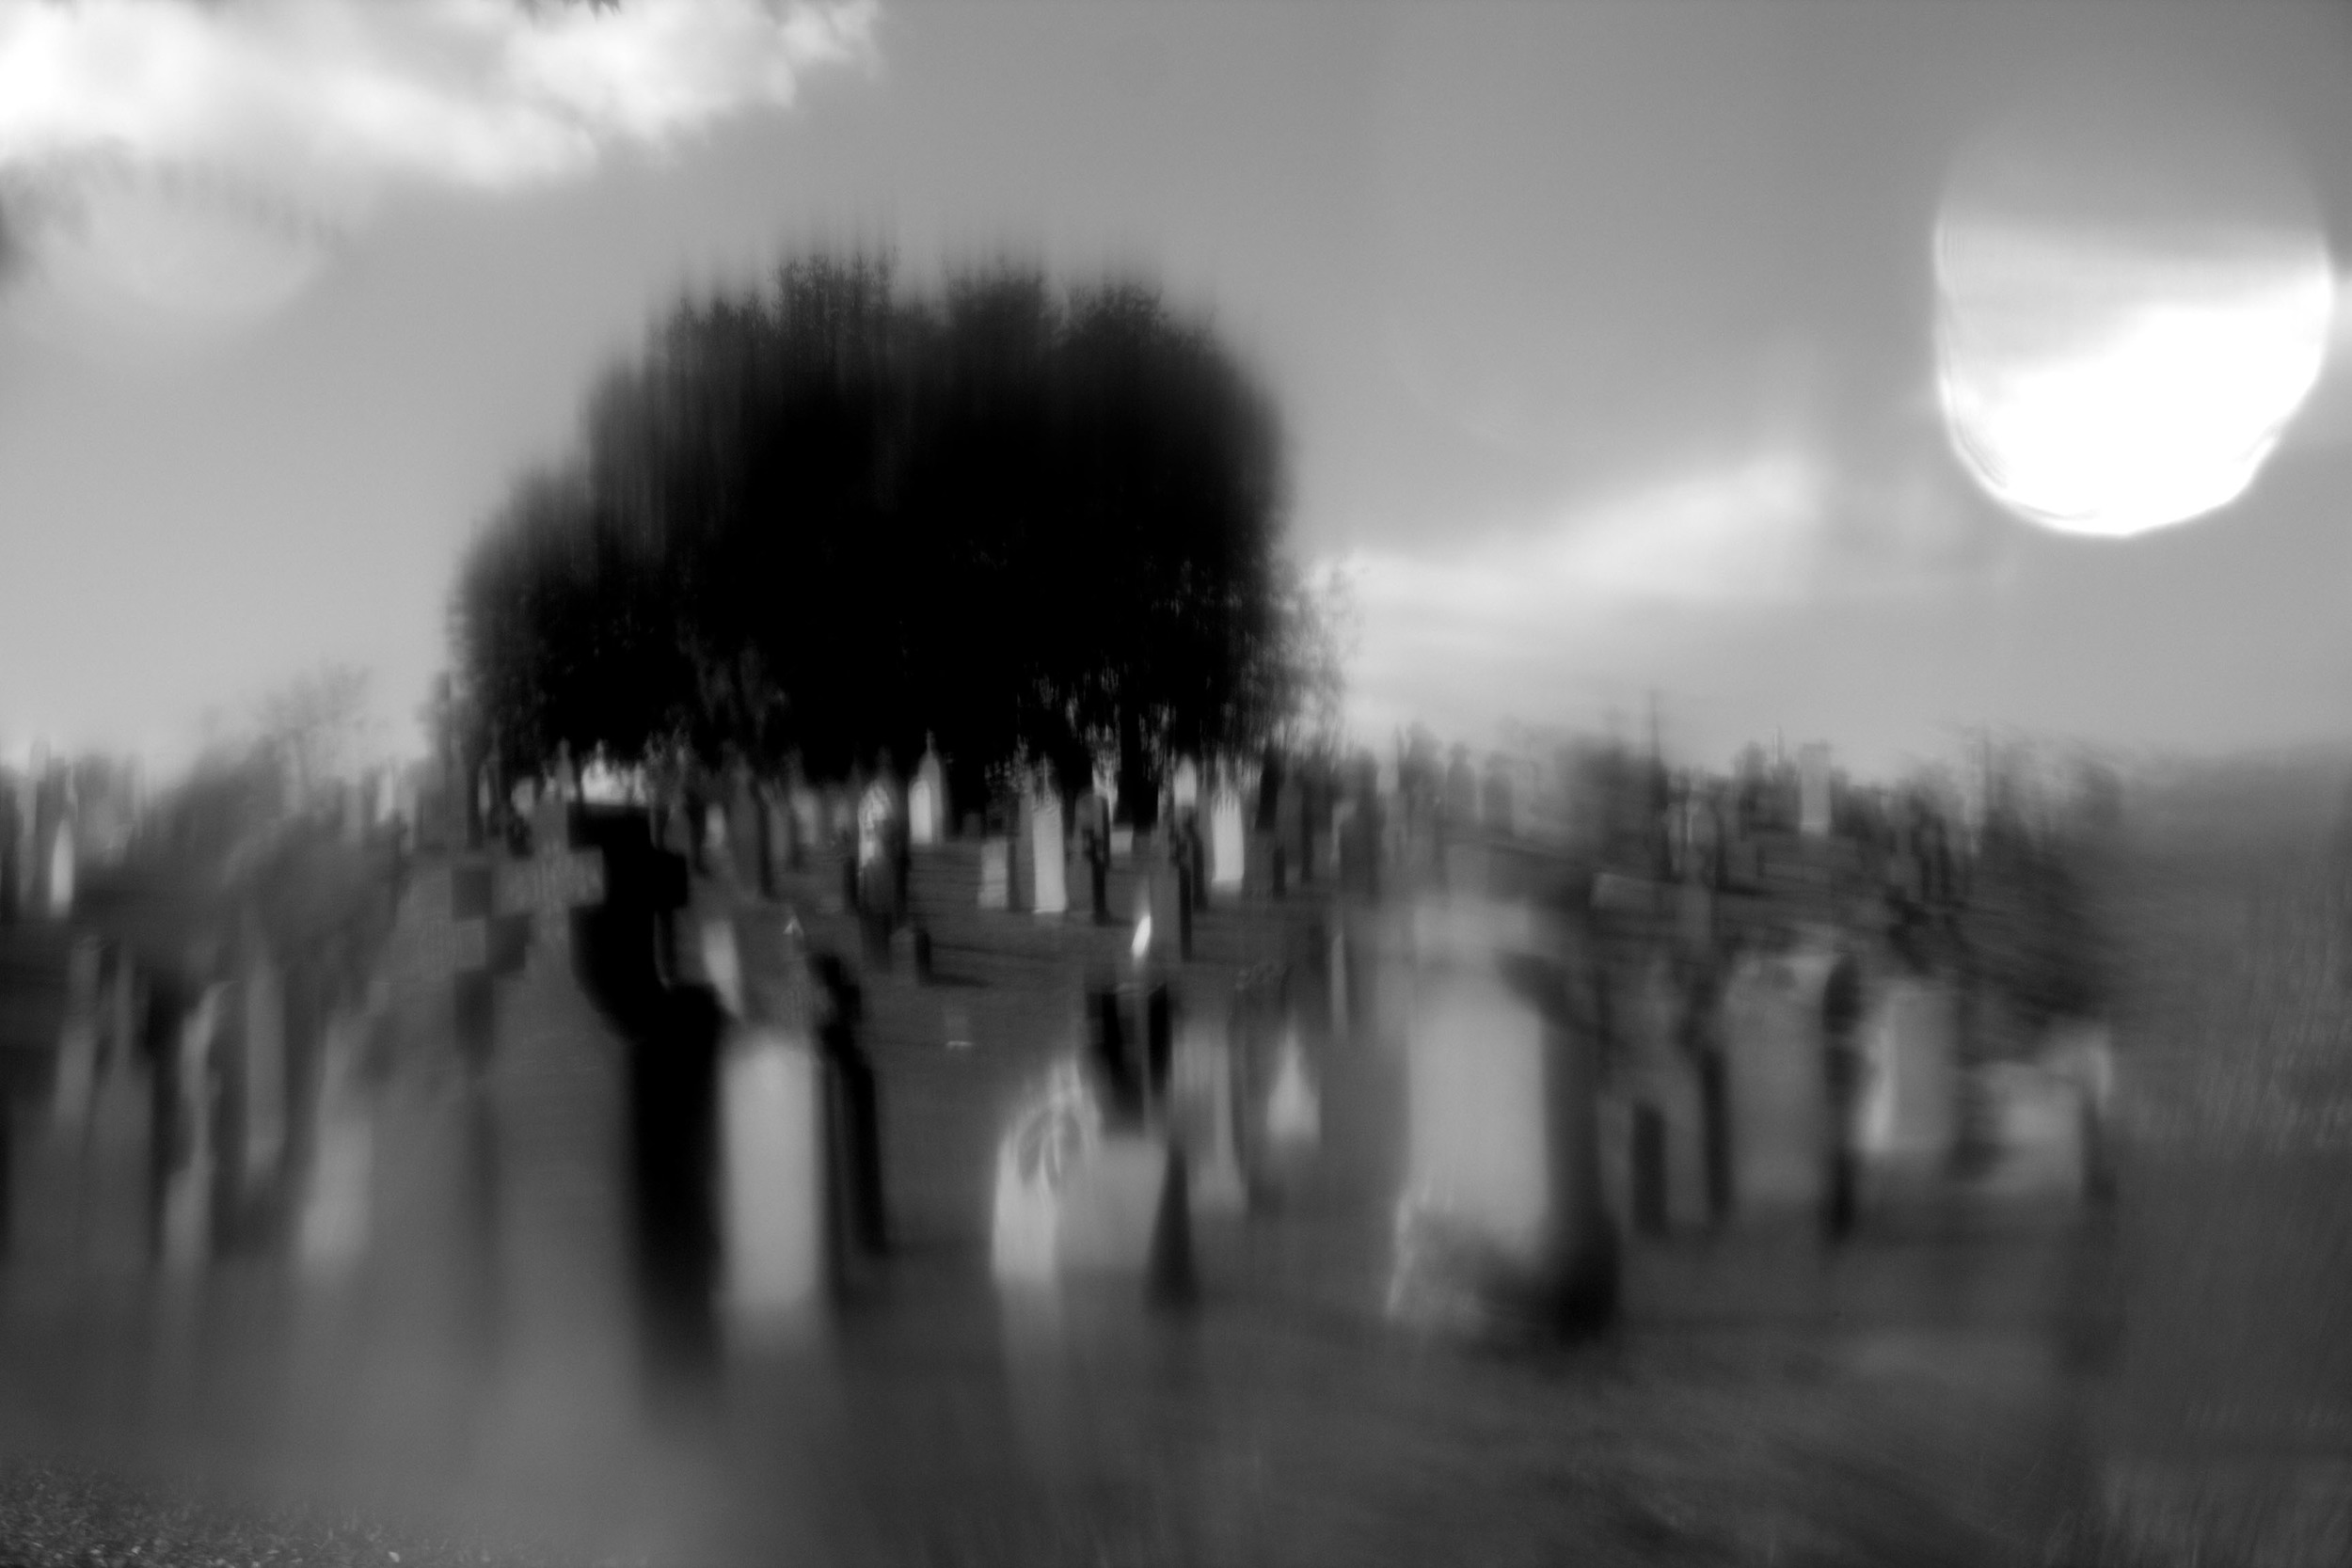  Image captured at the Calgary Cemetery in Queens, NY 2013 while looking through a plastic drinking bottle filter. &nbsp; 